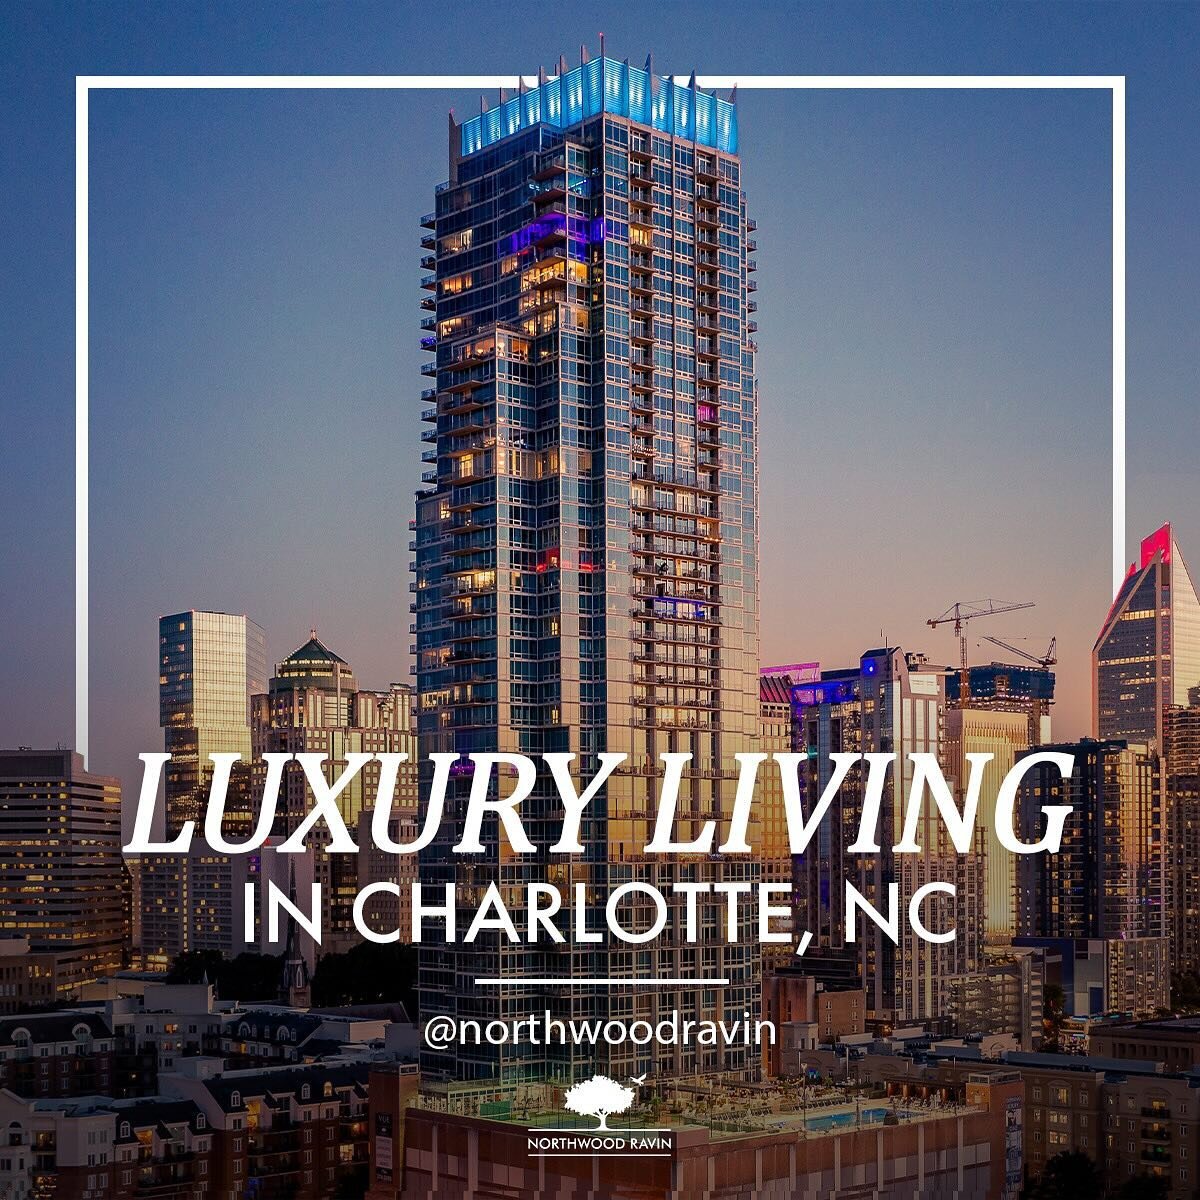 👏 With Derby Days less than one month away, we want to give a huge shoutout to our Presenting Sponsor, @northwoodravin!

Experience the epitome of luxury living in Charlotte, NC! Northwood Ravin&rsquo;s stunning apartments offer resort-style ameniti